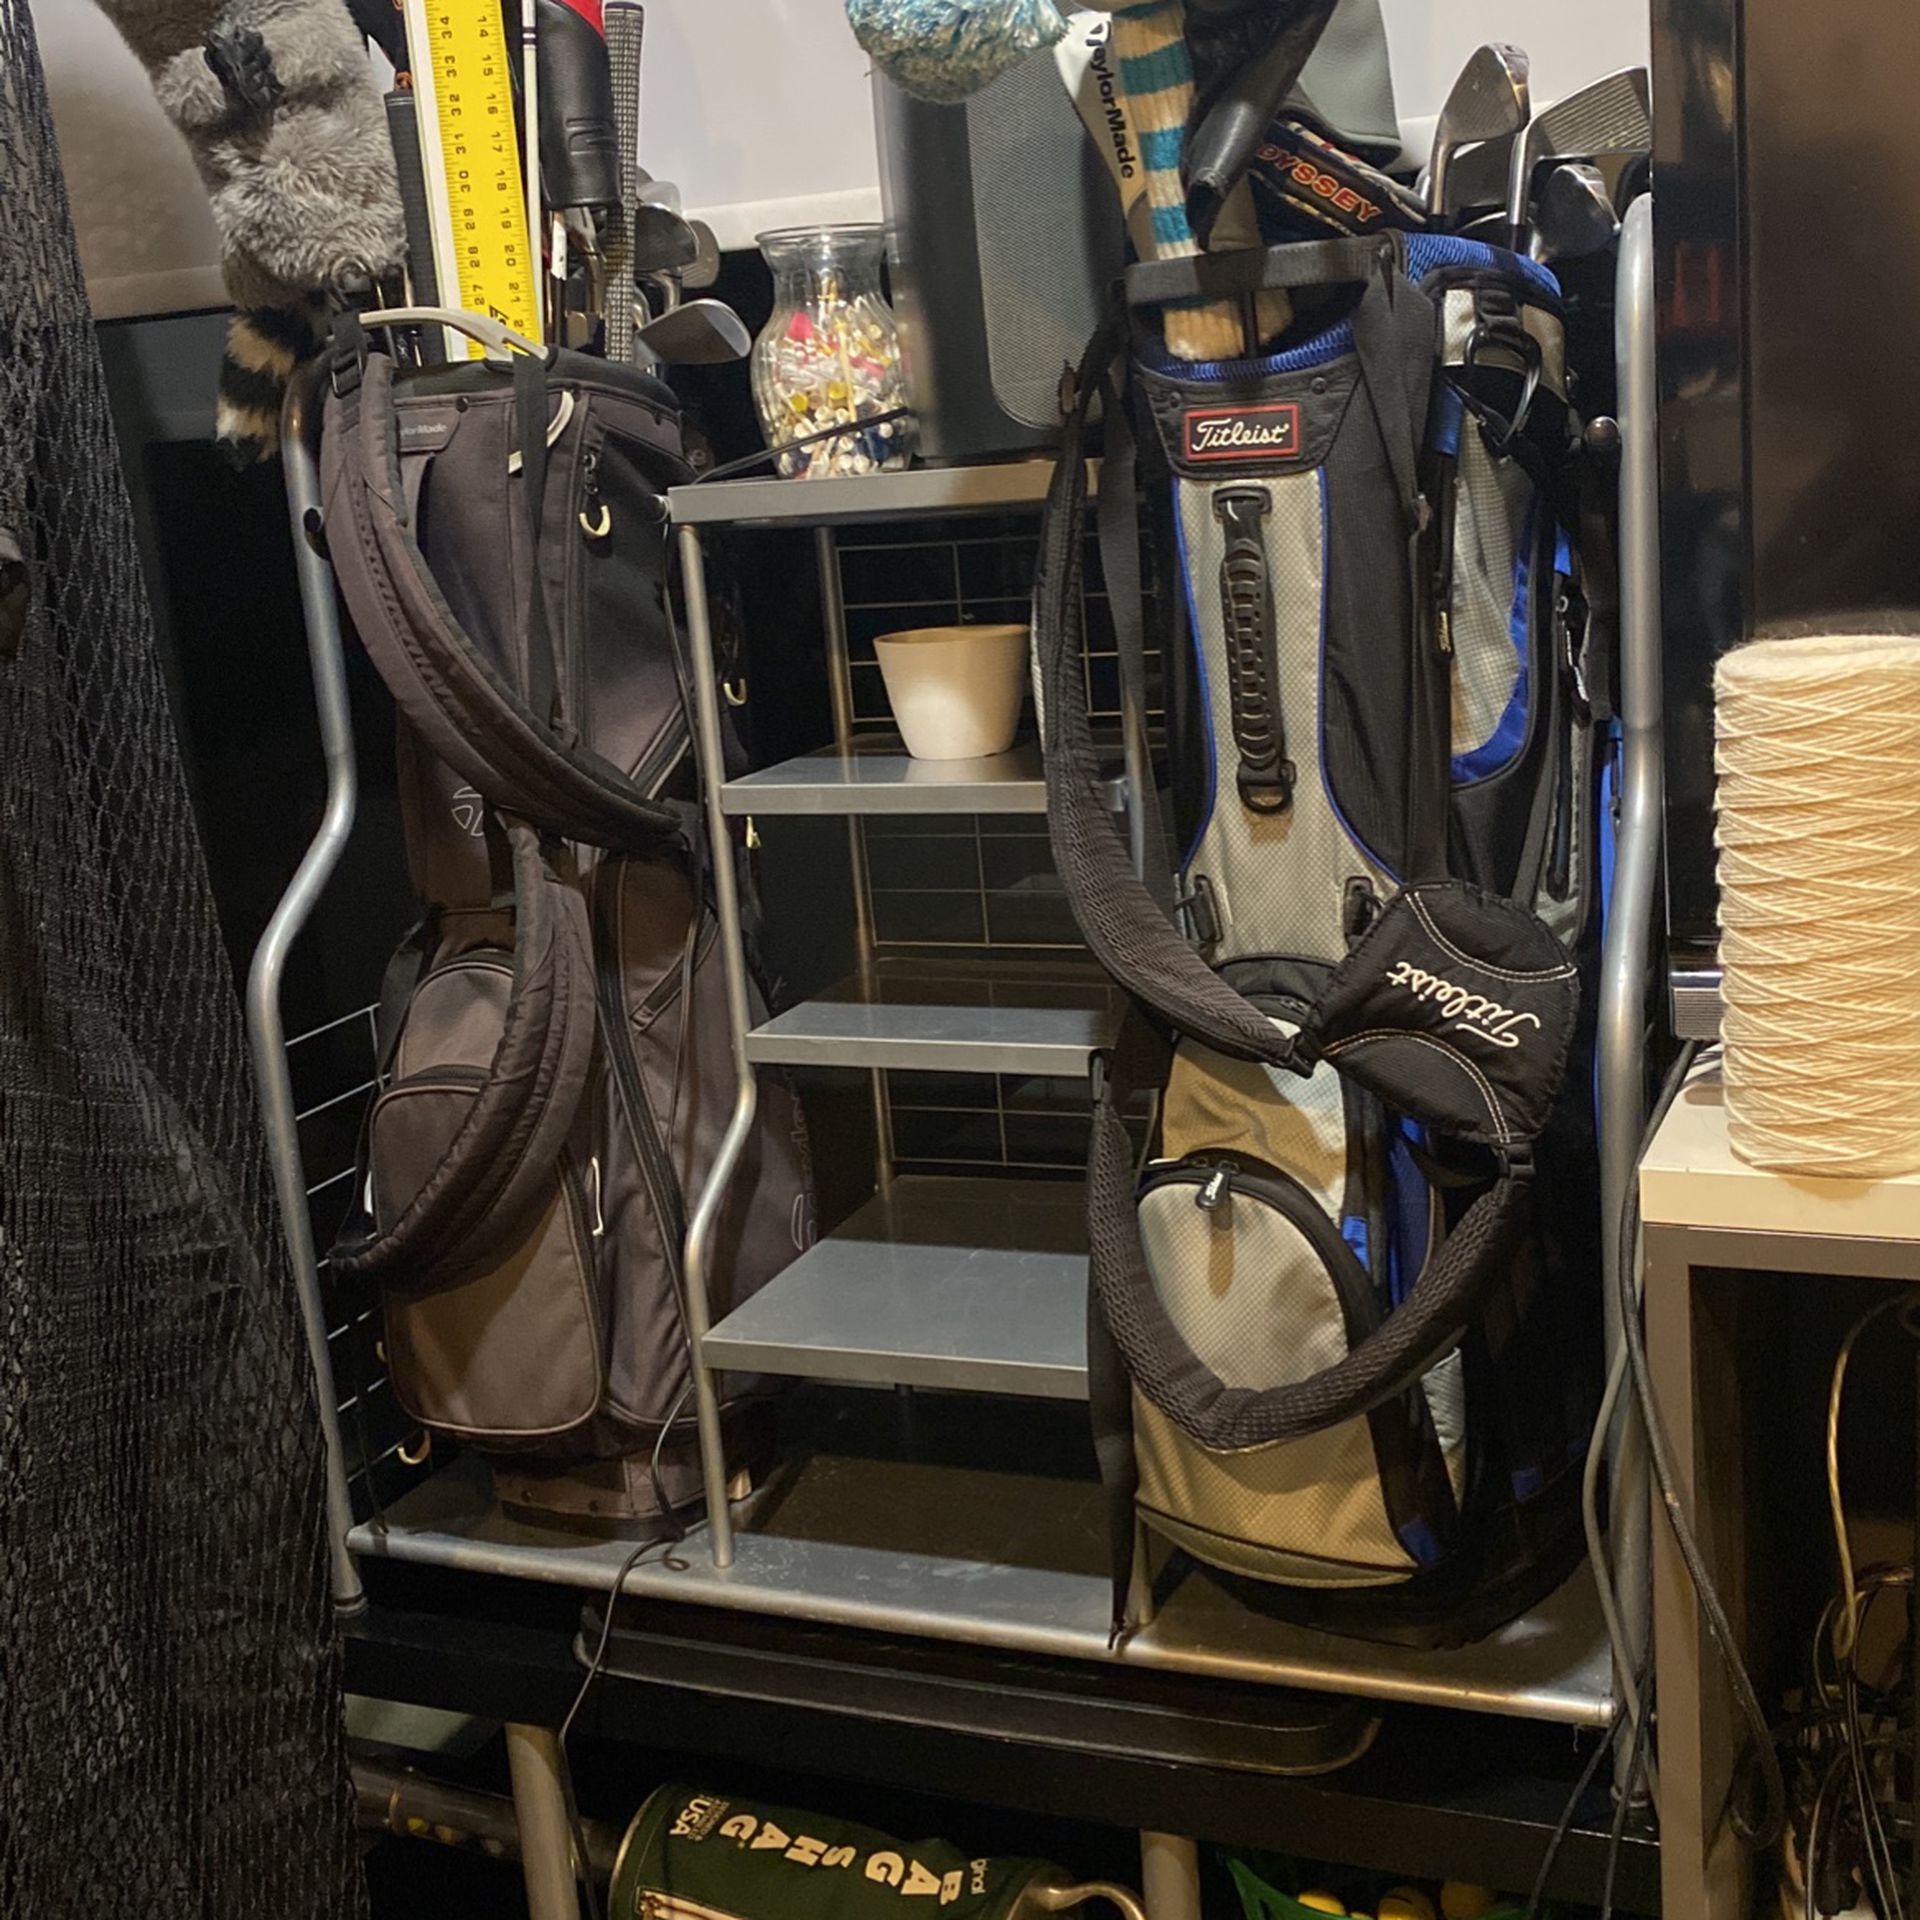 Golf Bags Rack For Garage - Holds 2 Bags